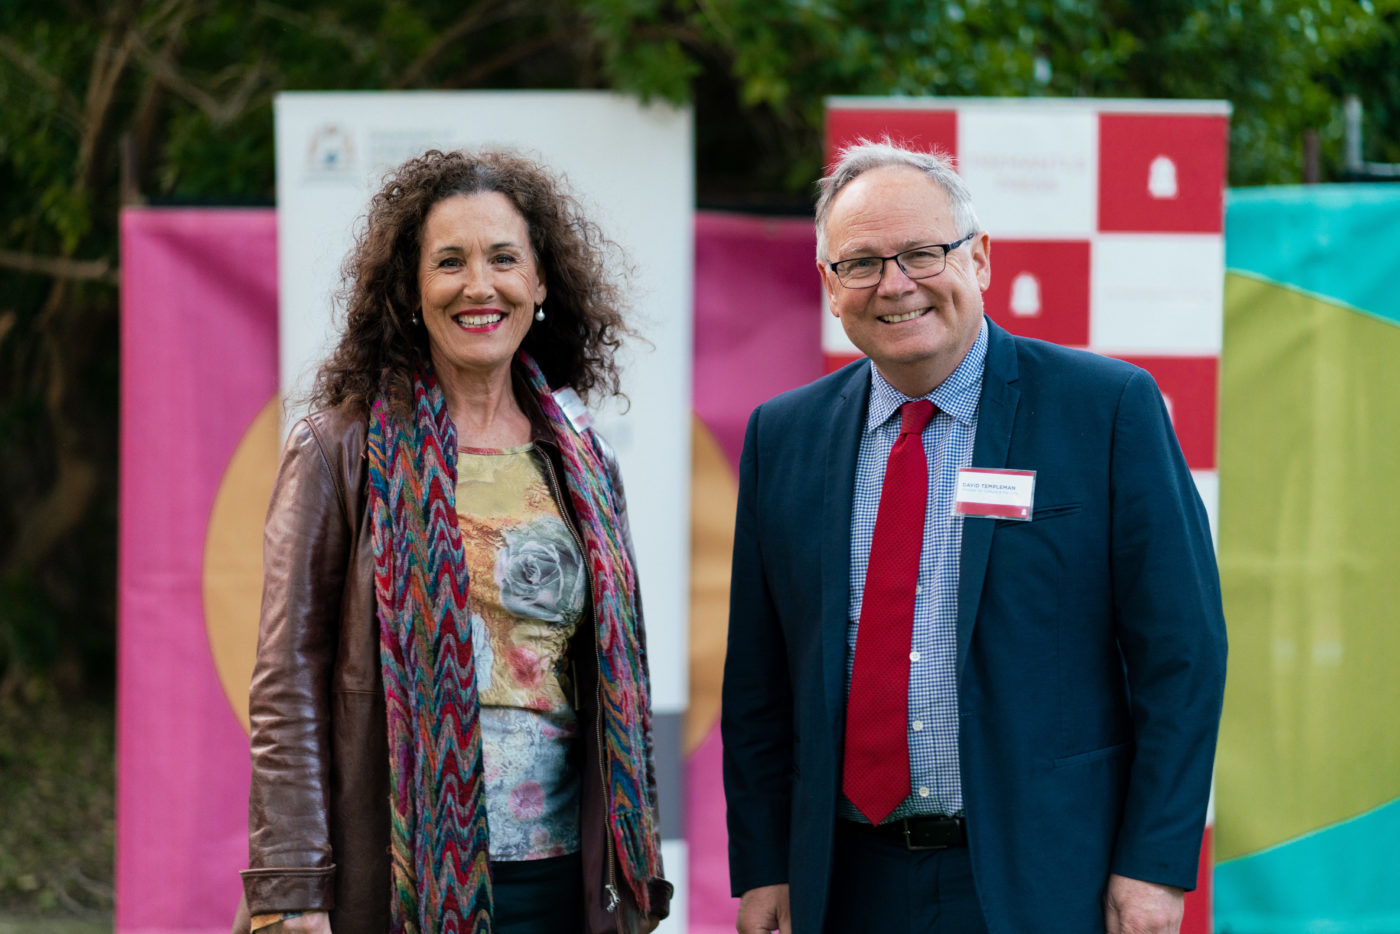 Jane Fraser, CEO of Fremantle Press, standing next to David Templeman, Minister for the Arts, both smiling at the camera